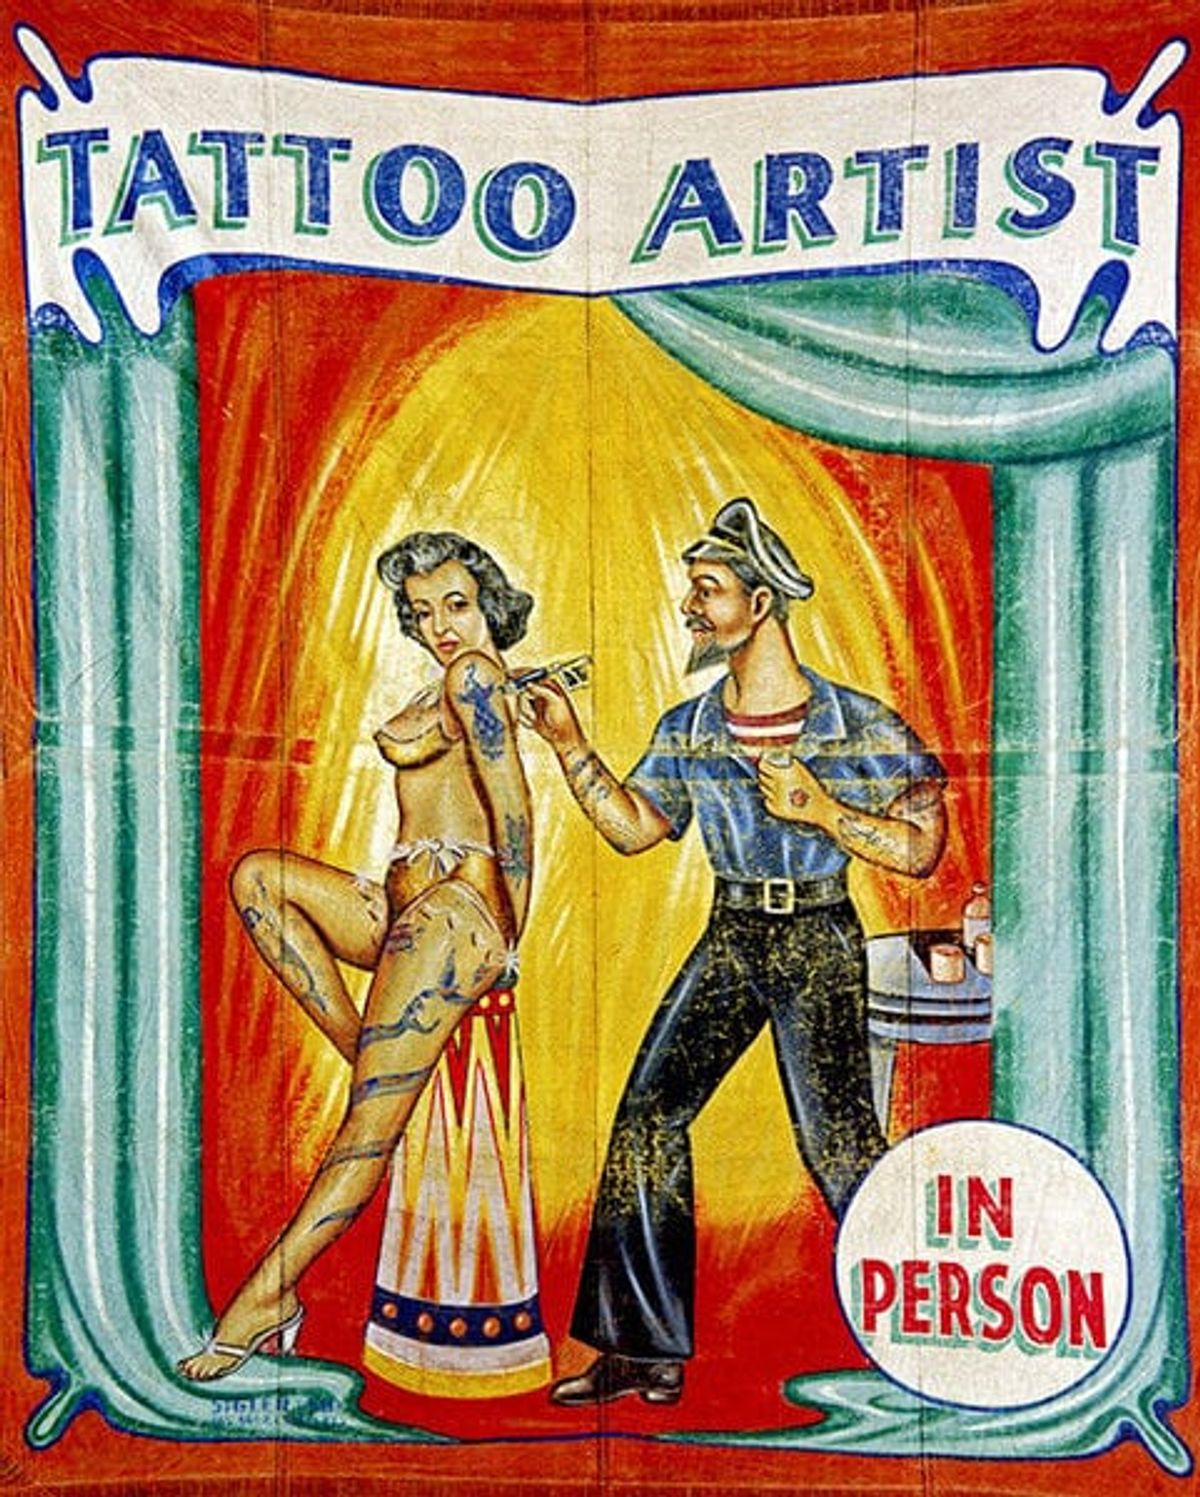 sideshow posters vintage